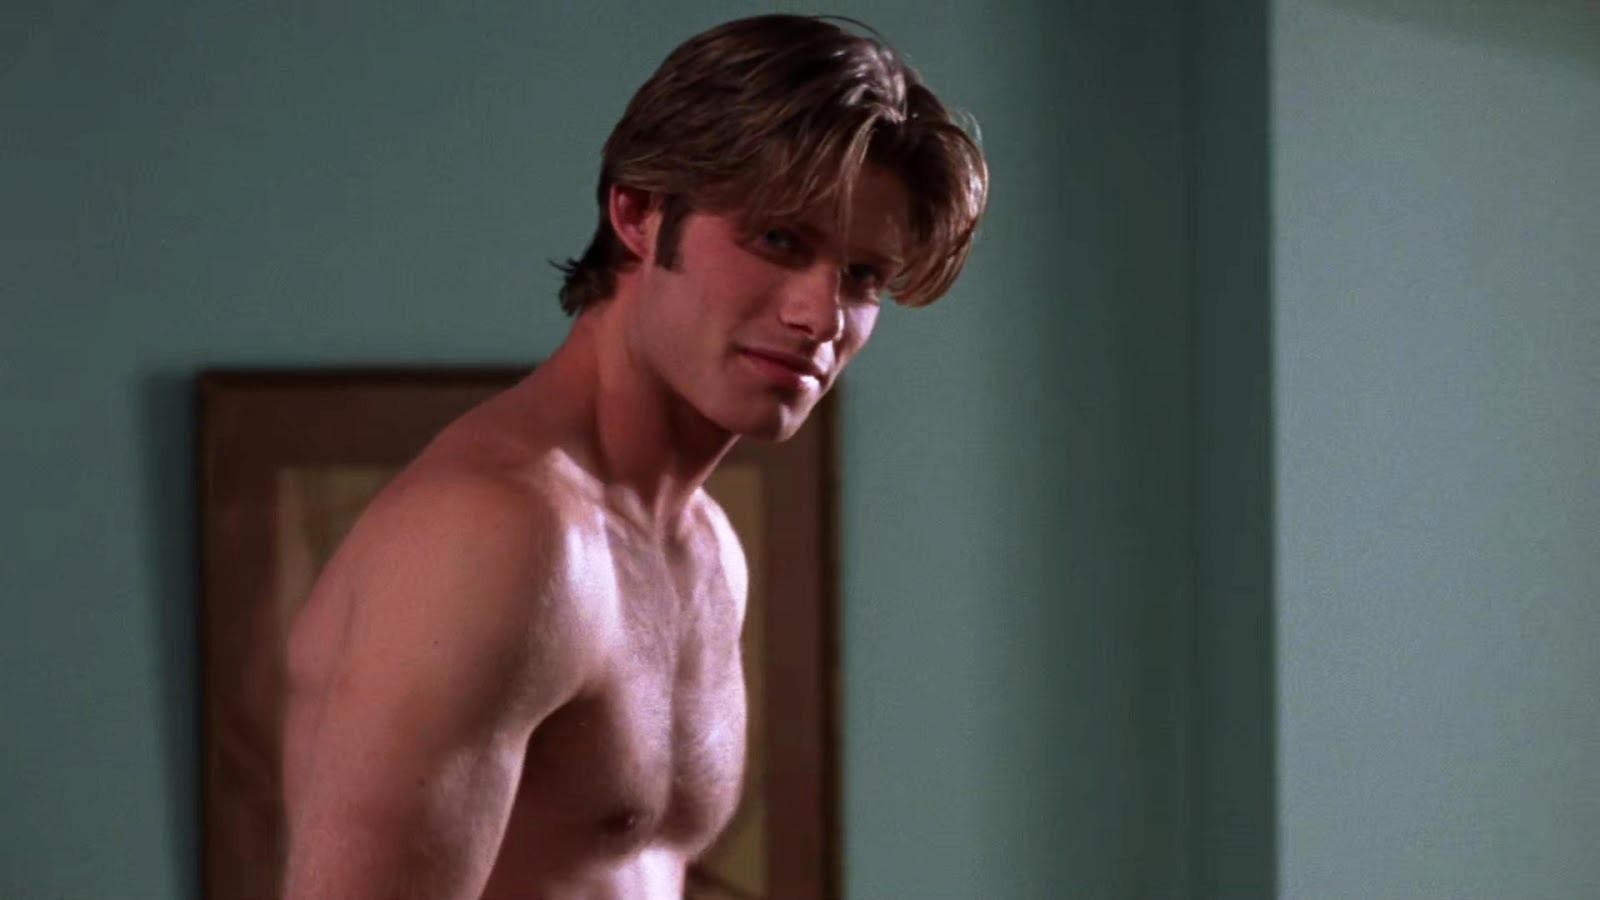 Chris Carmack in "The O.C." (Ep. 